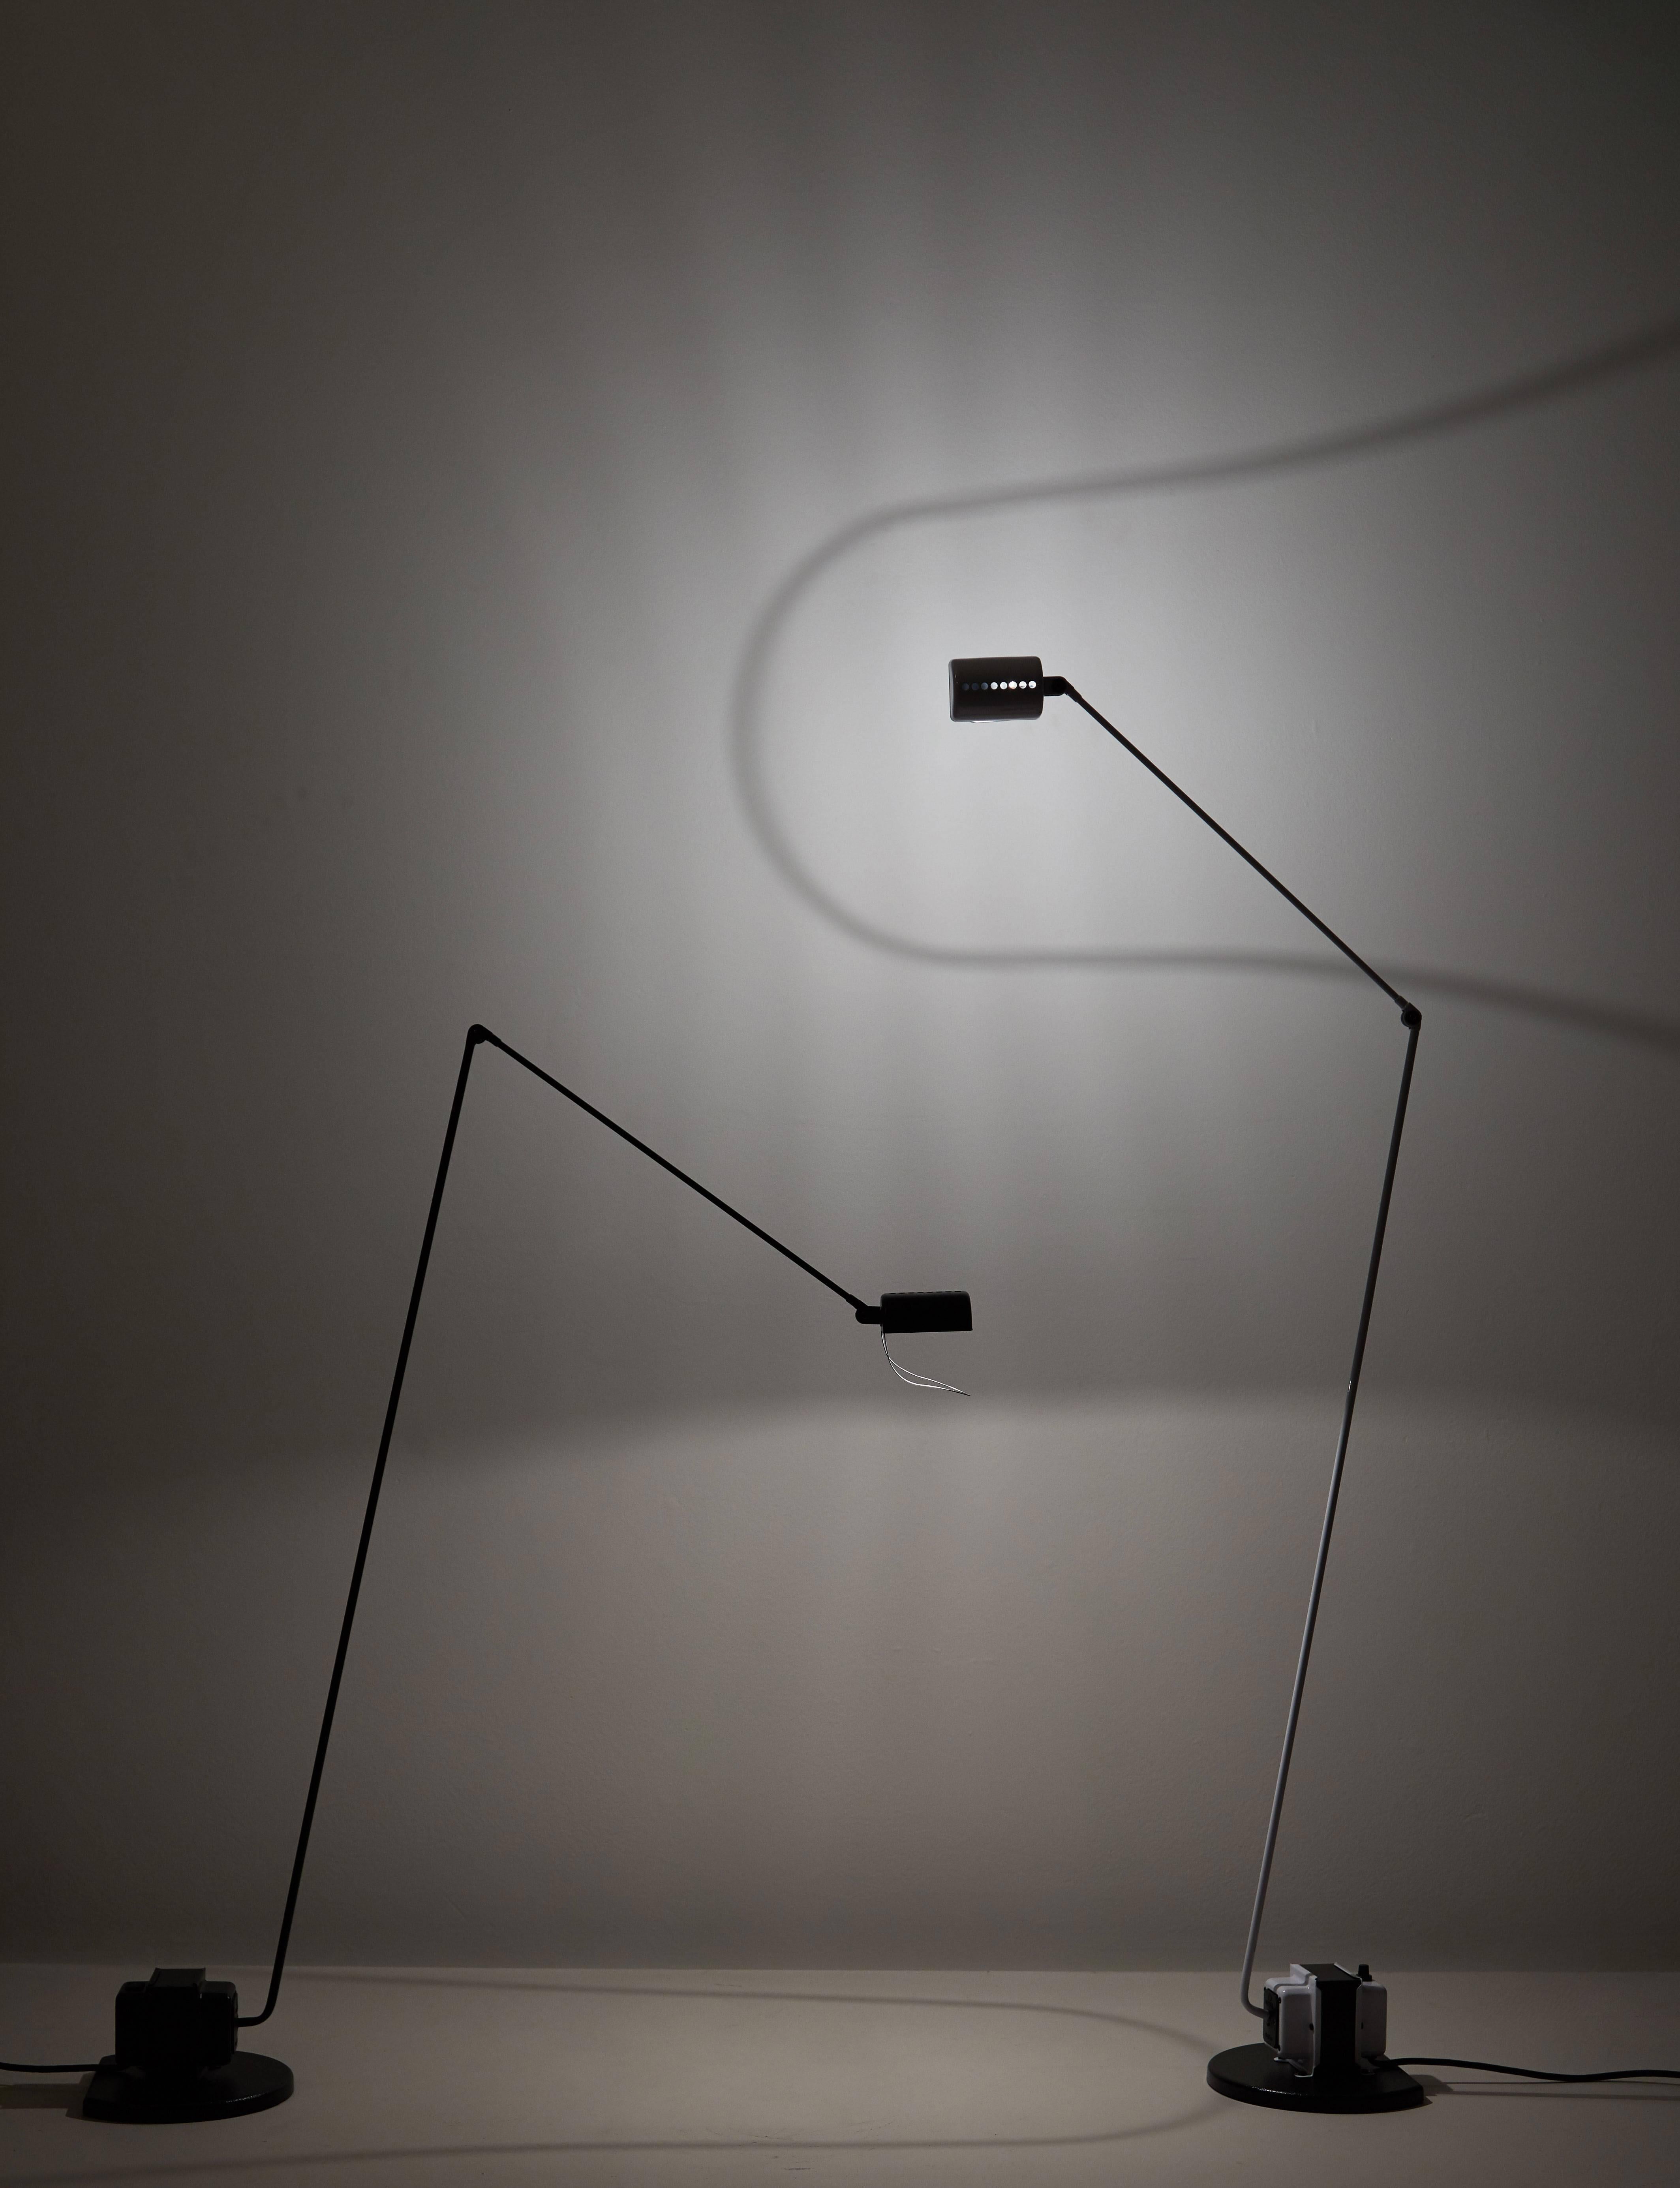 Daphine Terra floor lamp, originally designed by Tommaso Cimini in Italy, 1972. Composed of a metal frame with an articulated arm and diffuser which pivots 360° and and adjustable shade. Takes one G9 halogen bulb or LED 8w bulb. On/off  floor